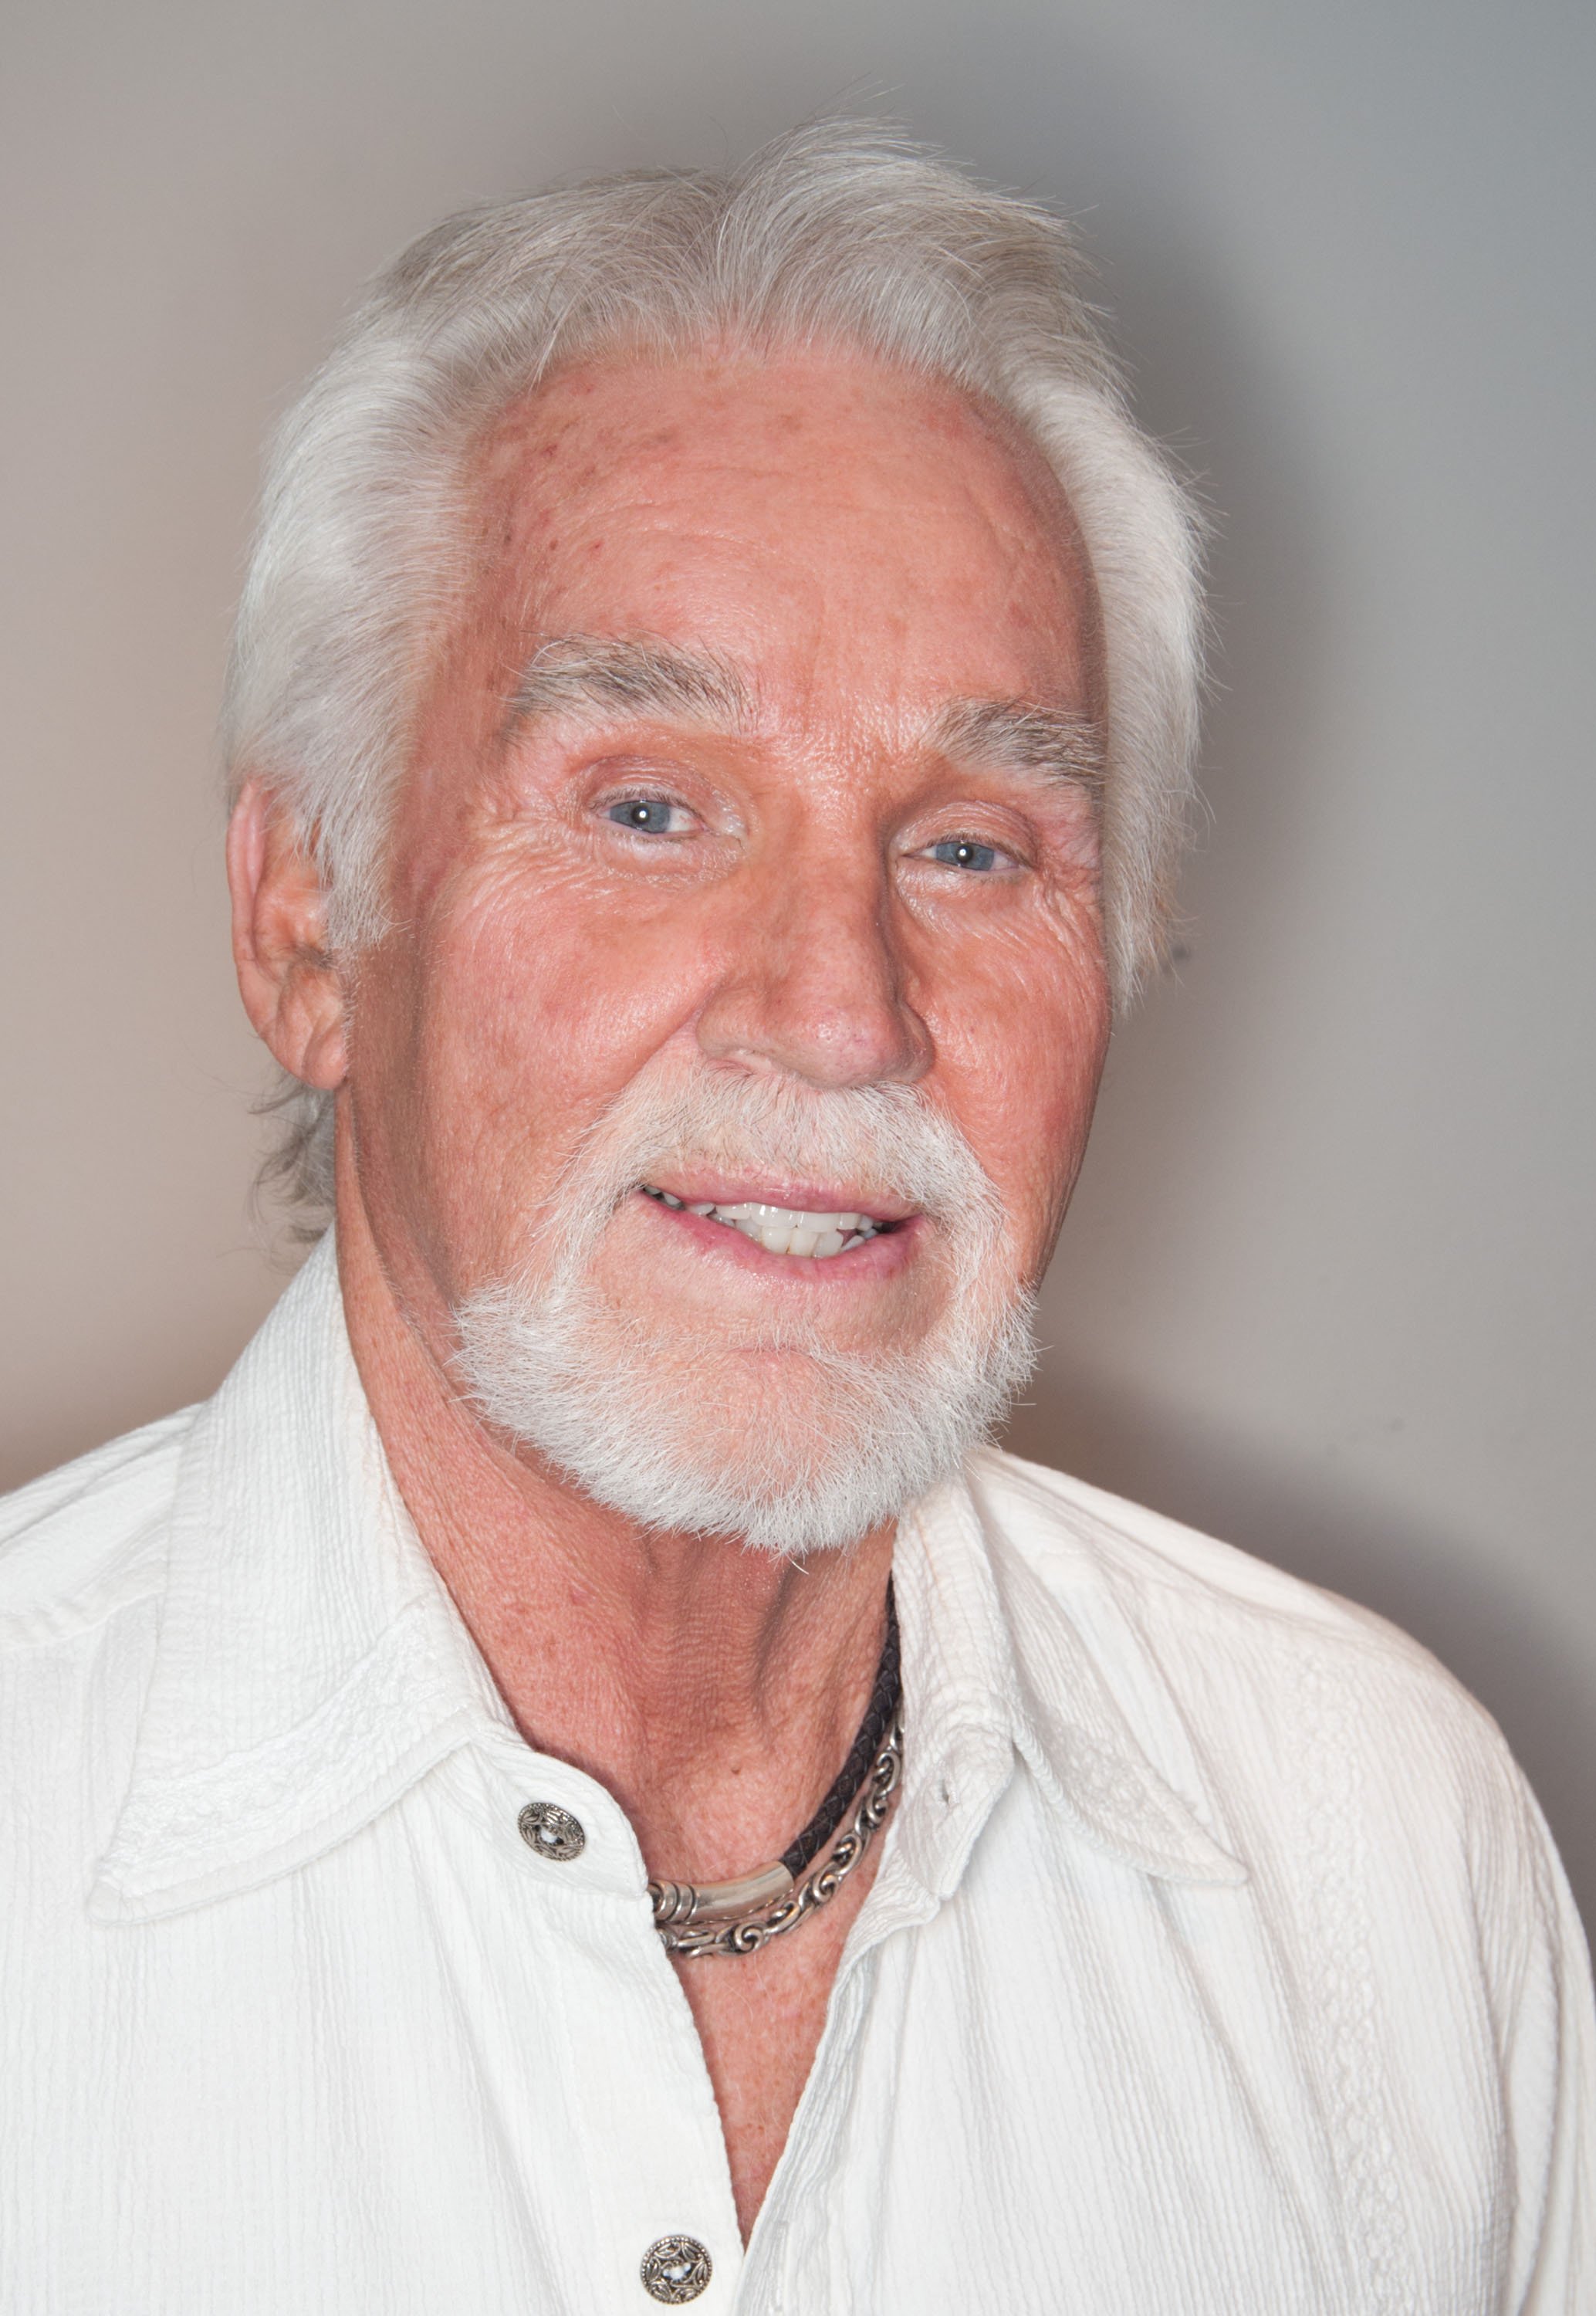 Kenny Rogers posing backstage at Route 66 Casino's Legends Theater on October 16, 2010 in Albuquerque, New Mexico. / Source: Getty Images